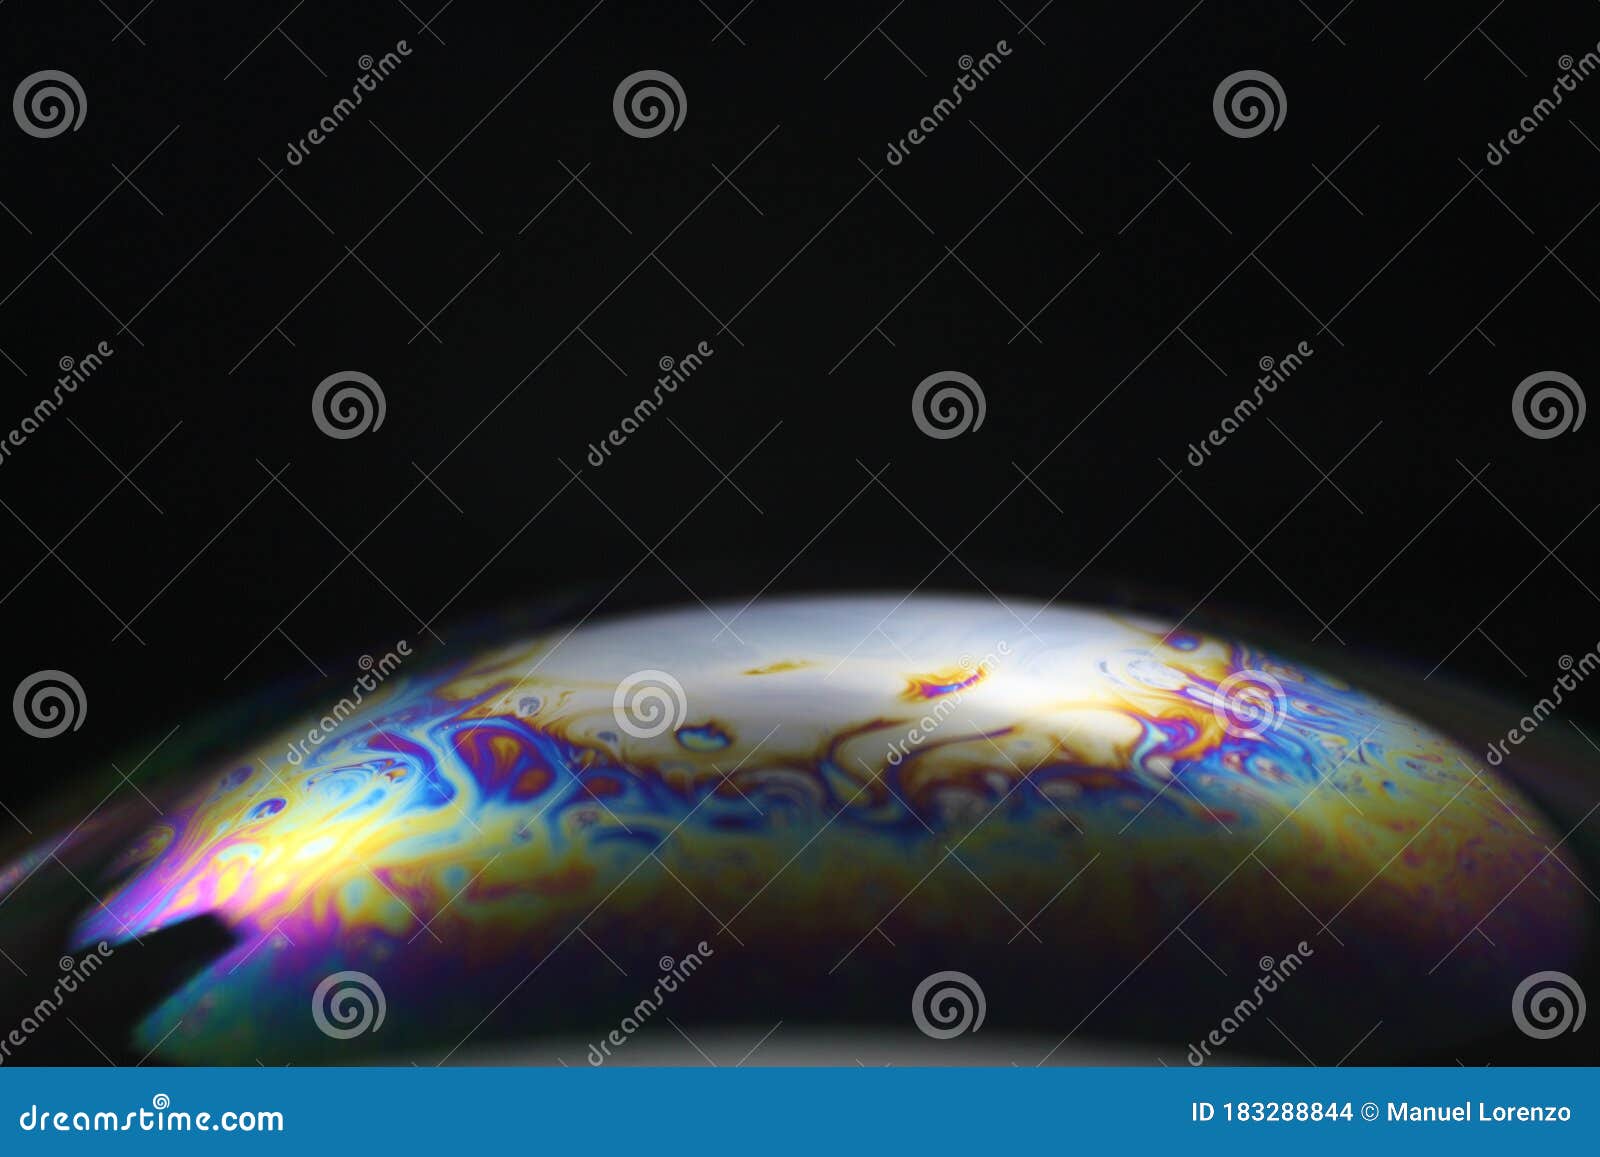 planets colors effects space sphere abstract stellar soap funds